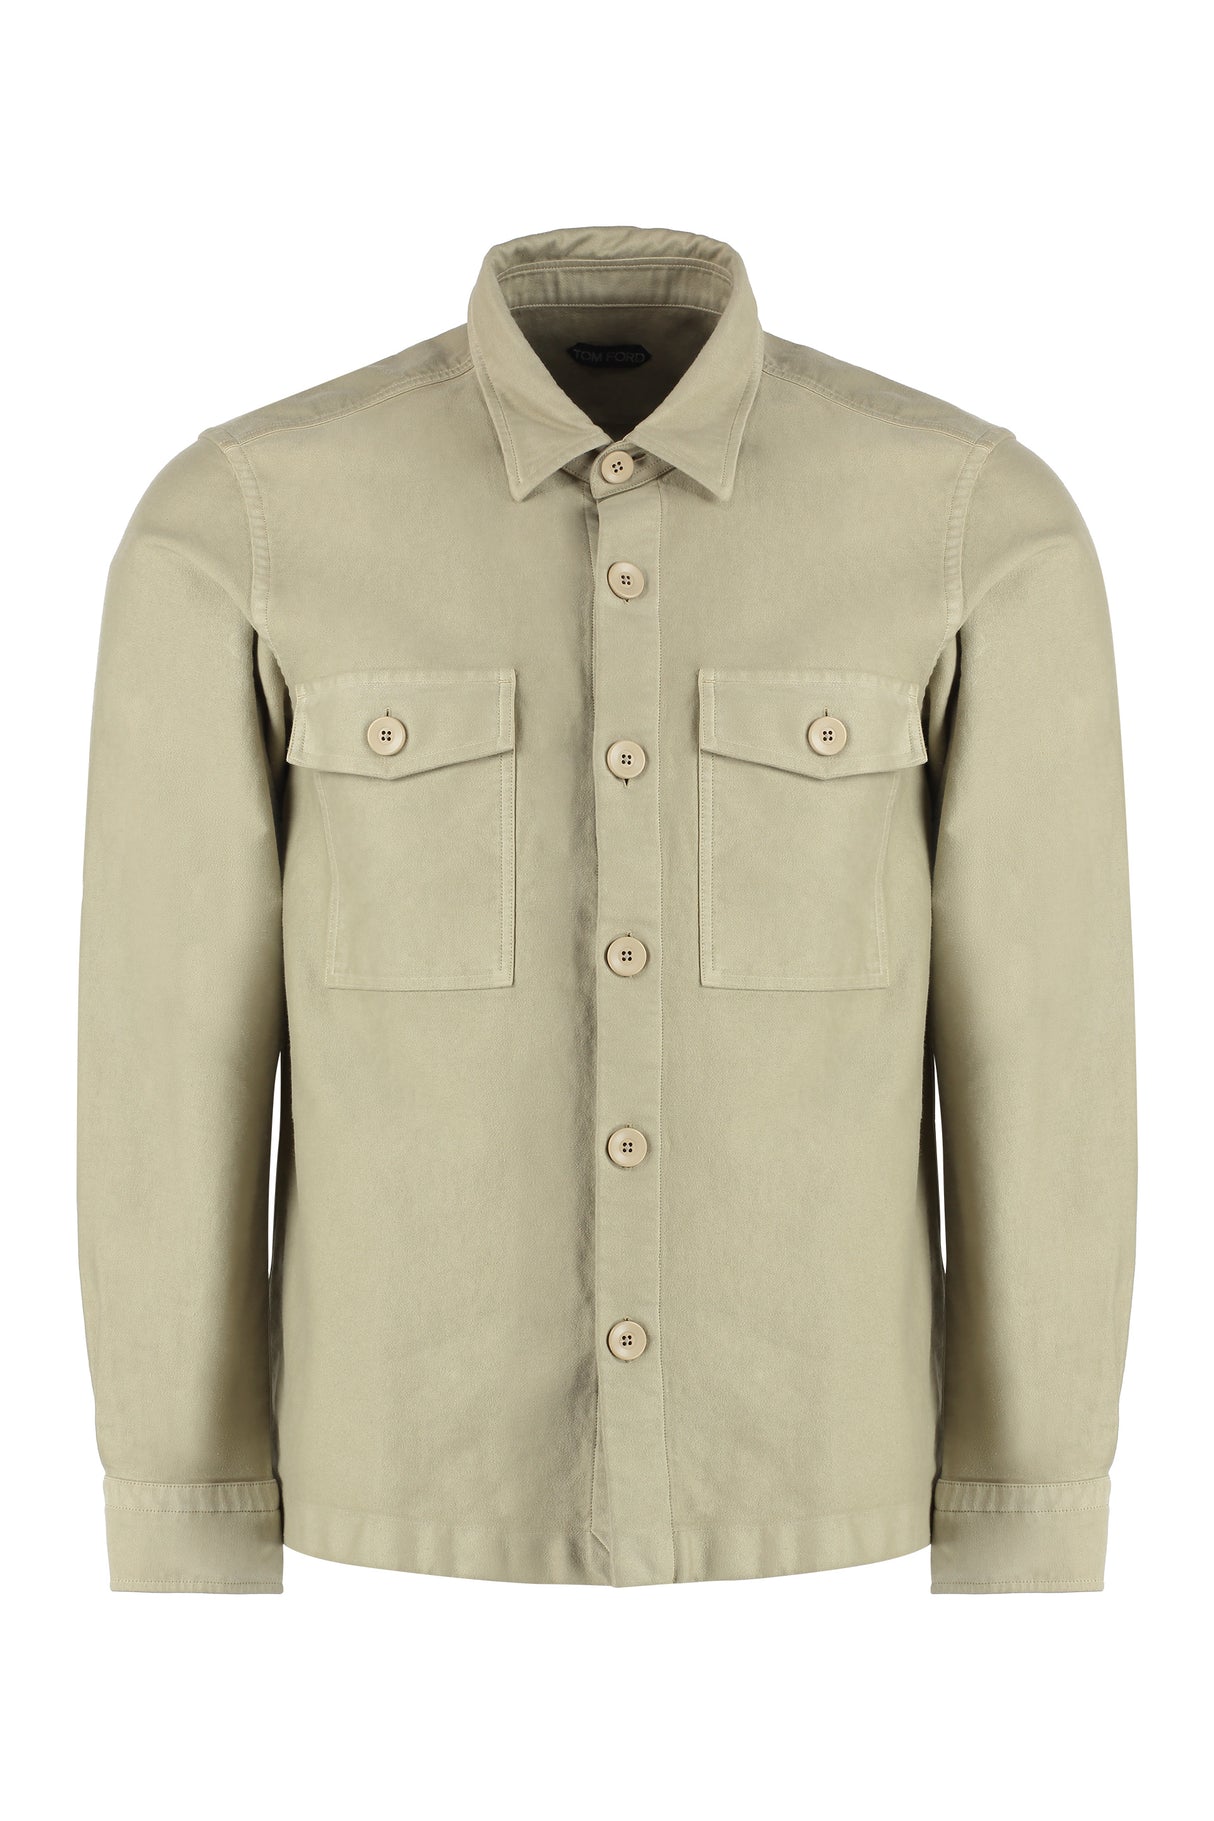 TOM FORD Beige Cotton Overshirt for Men - SS23 Collection